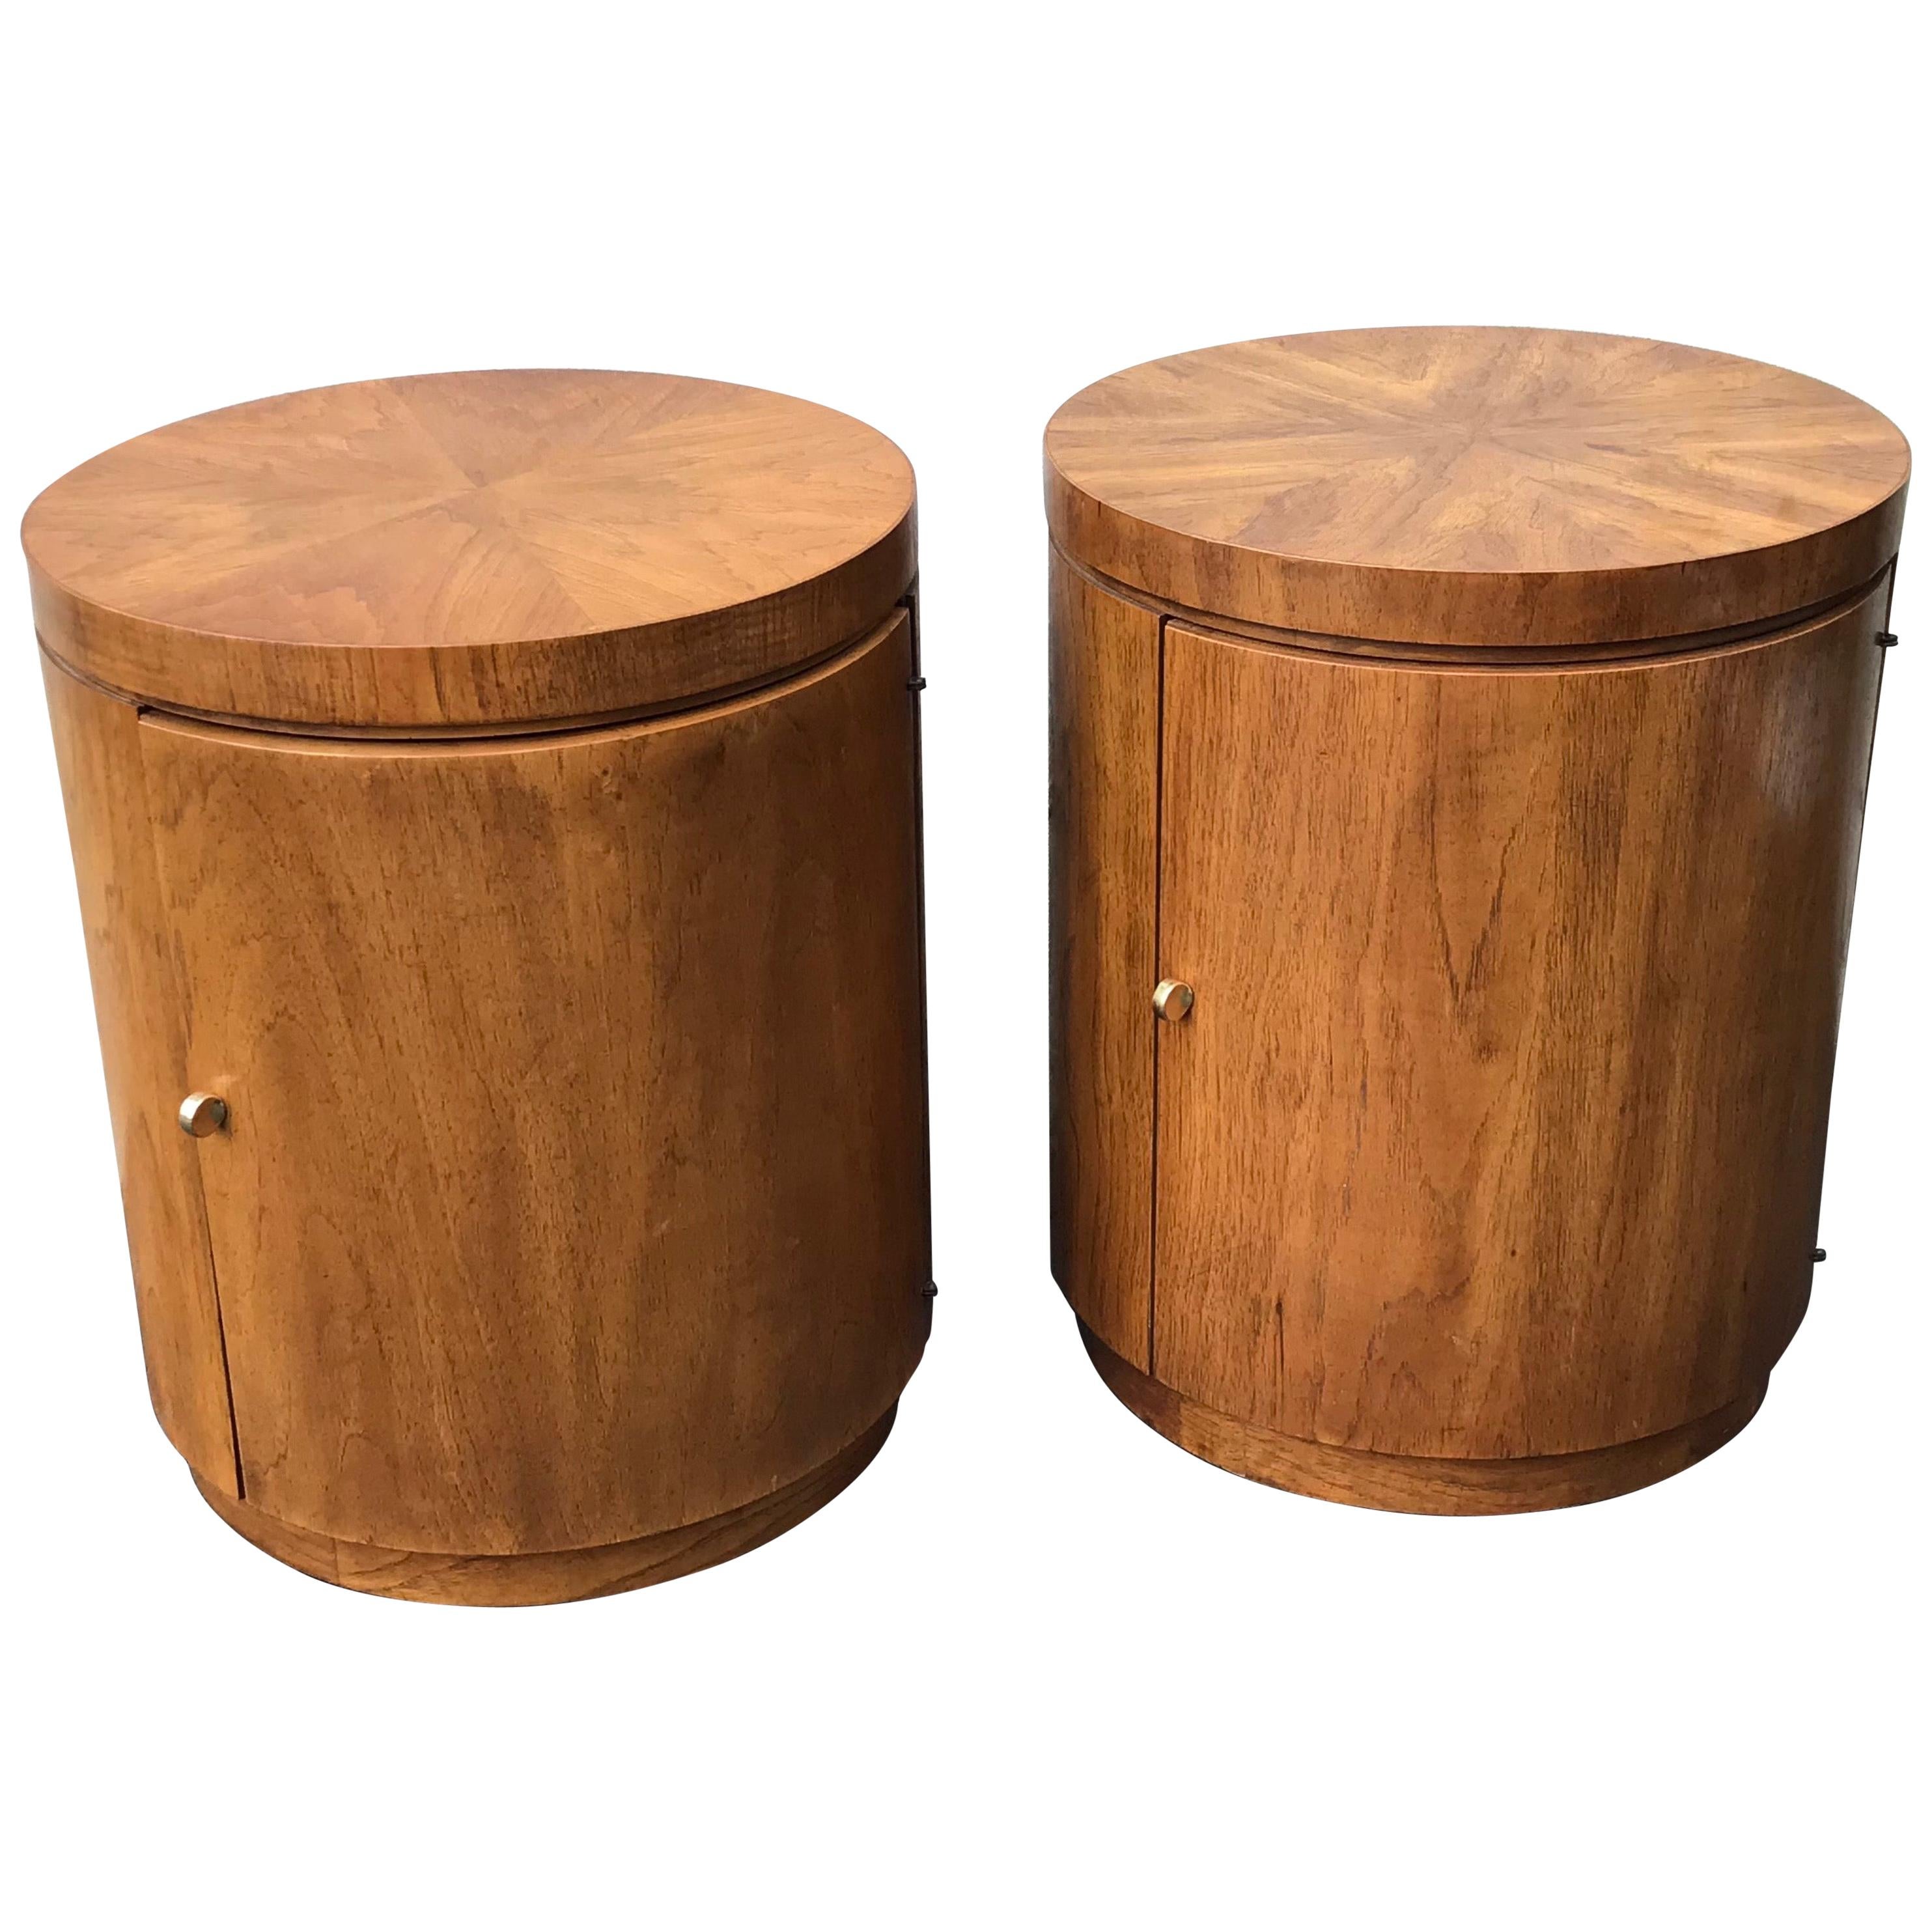 Pair of Mid-Century Modern Tubular Round Side Tables by Drexel